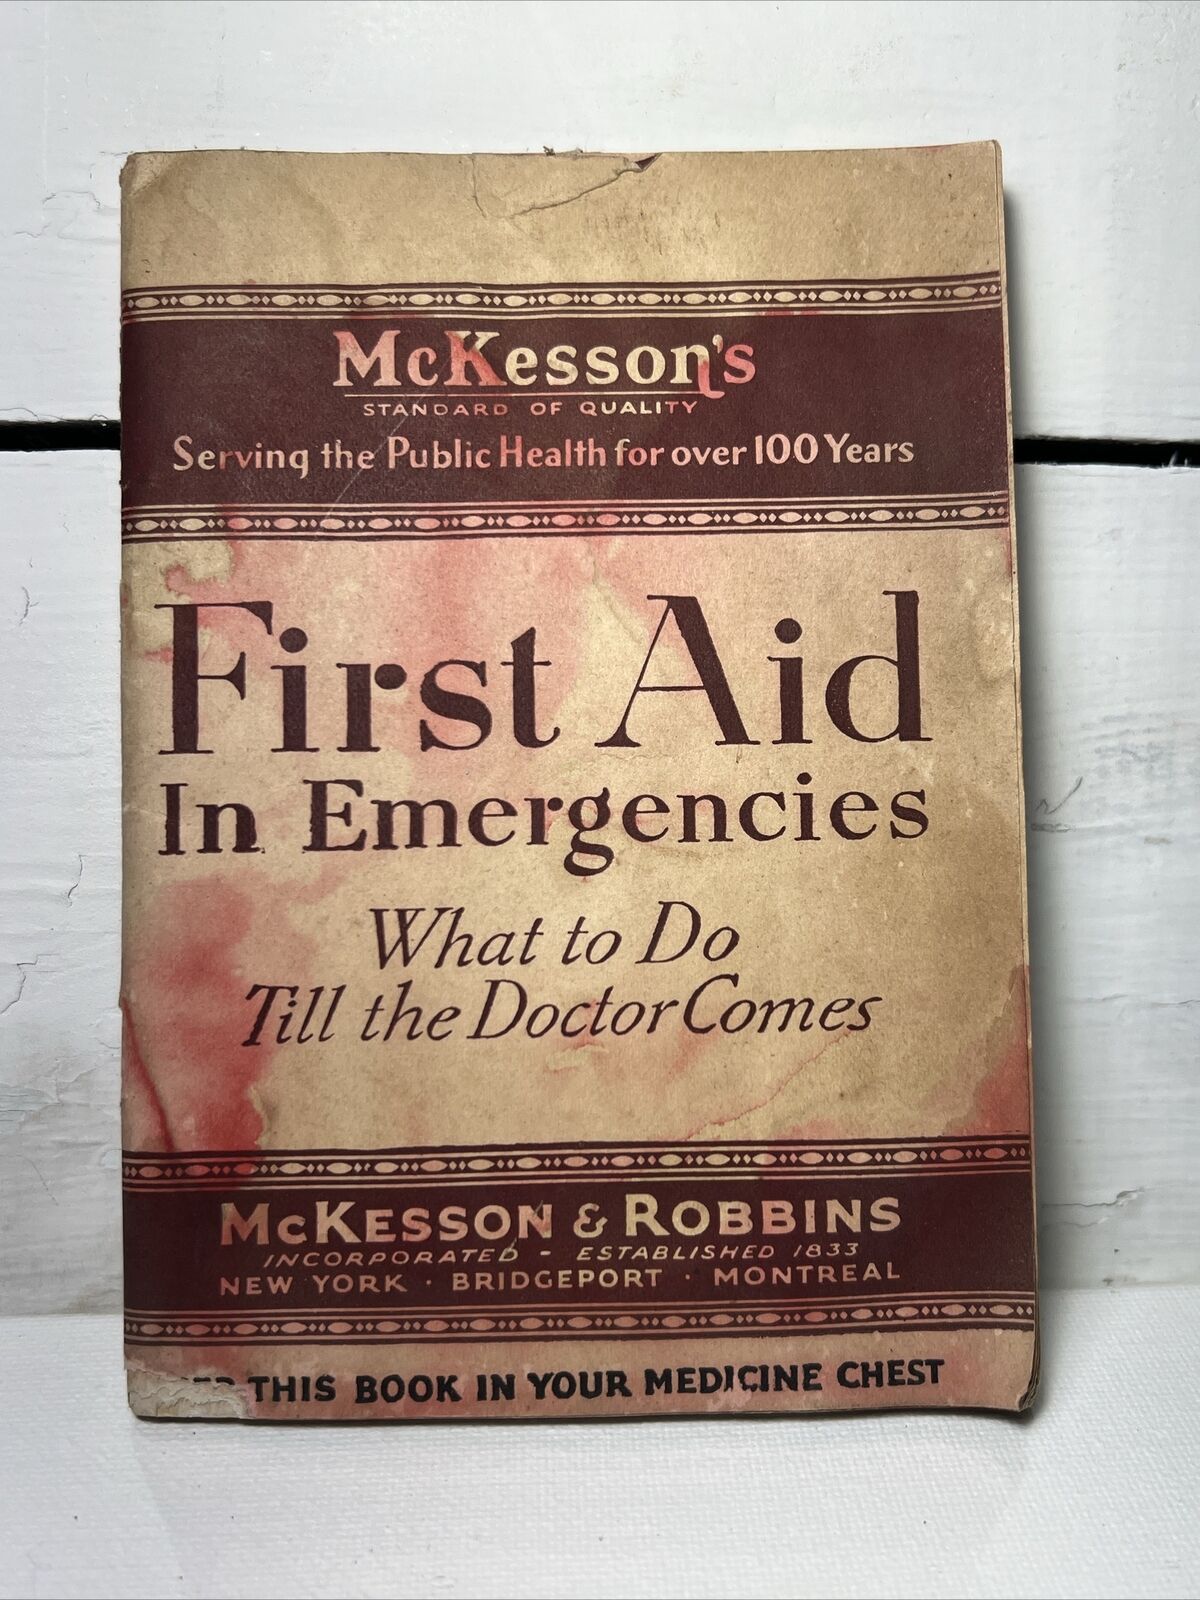 McKesson’s First Aid In Emergencies Booklet Pamphlet 1930 